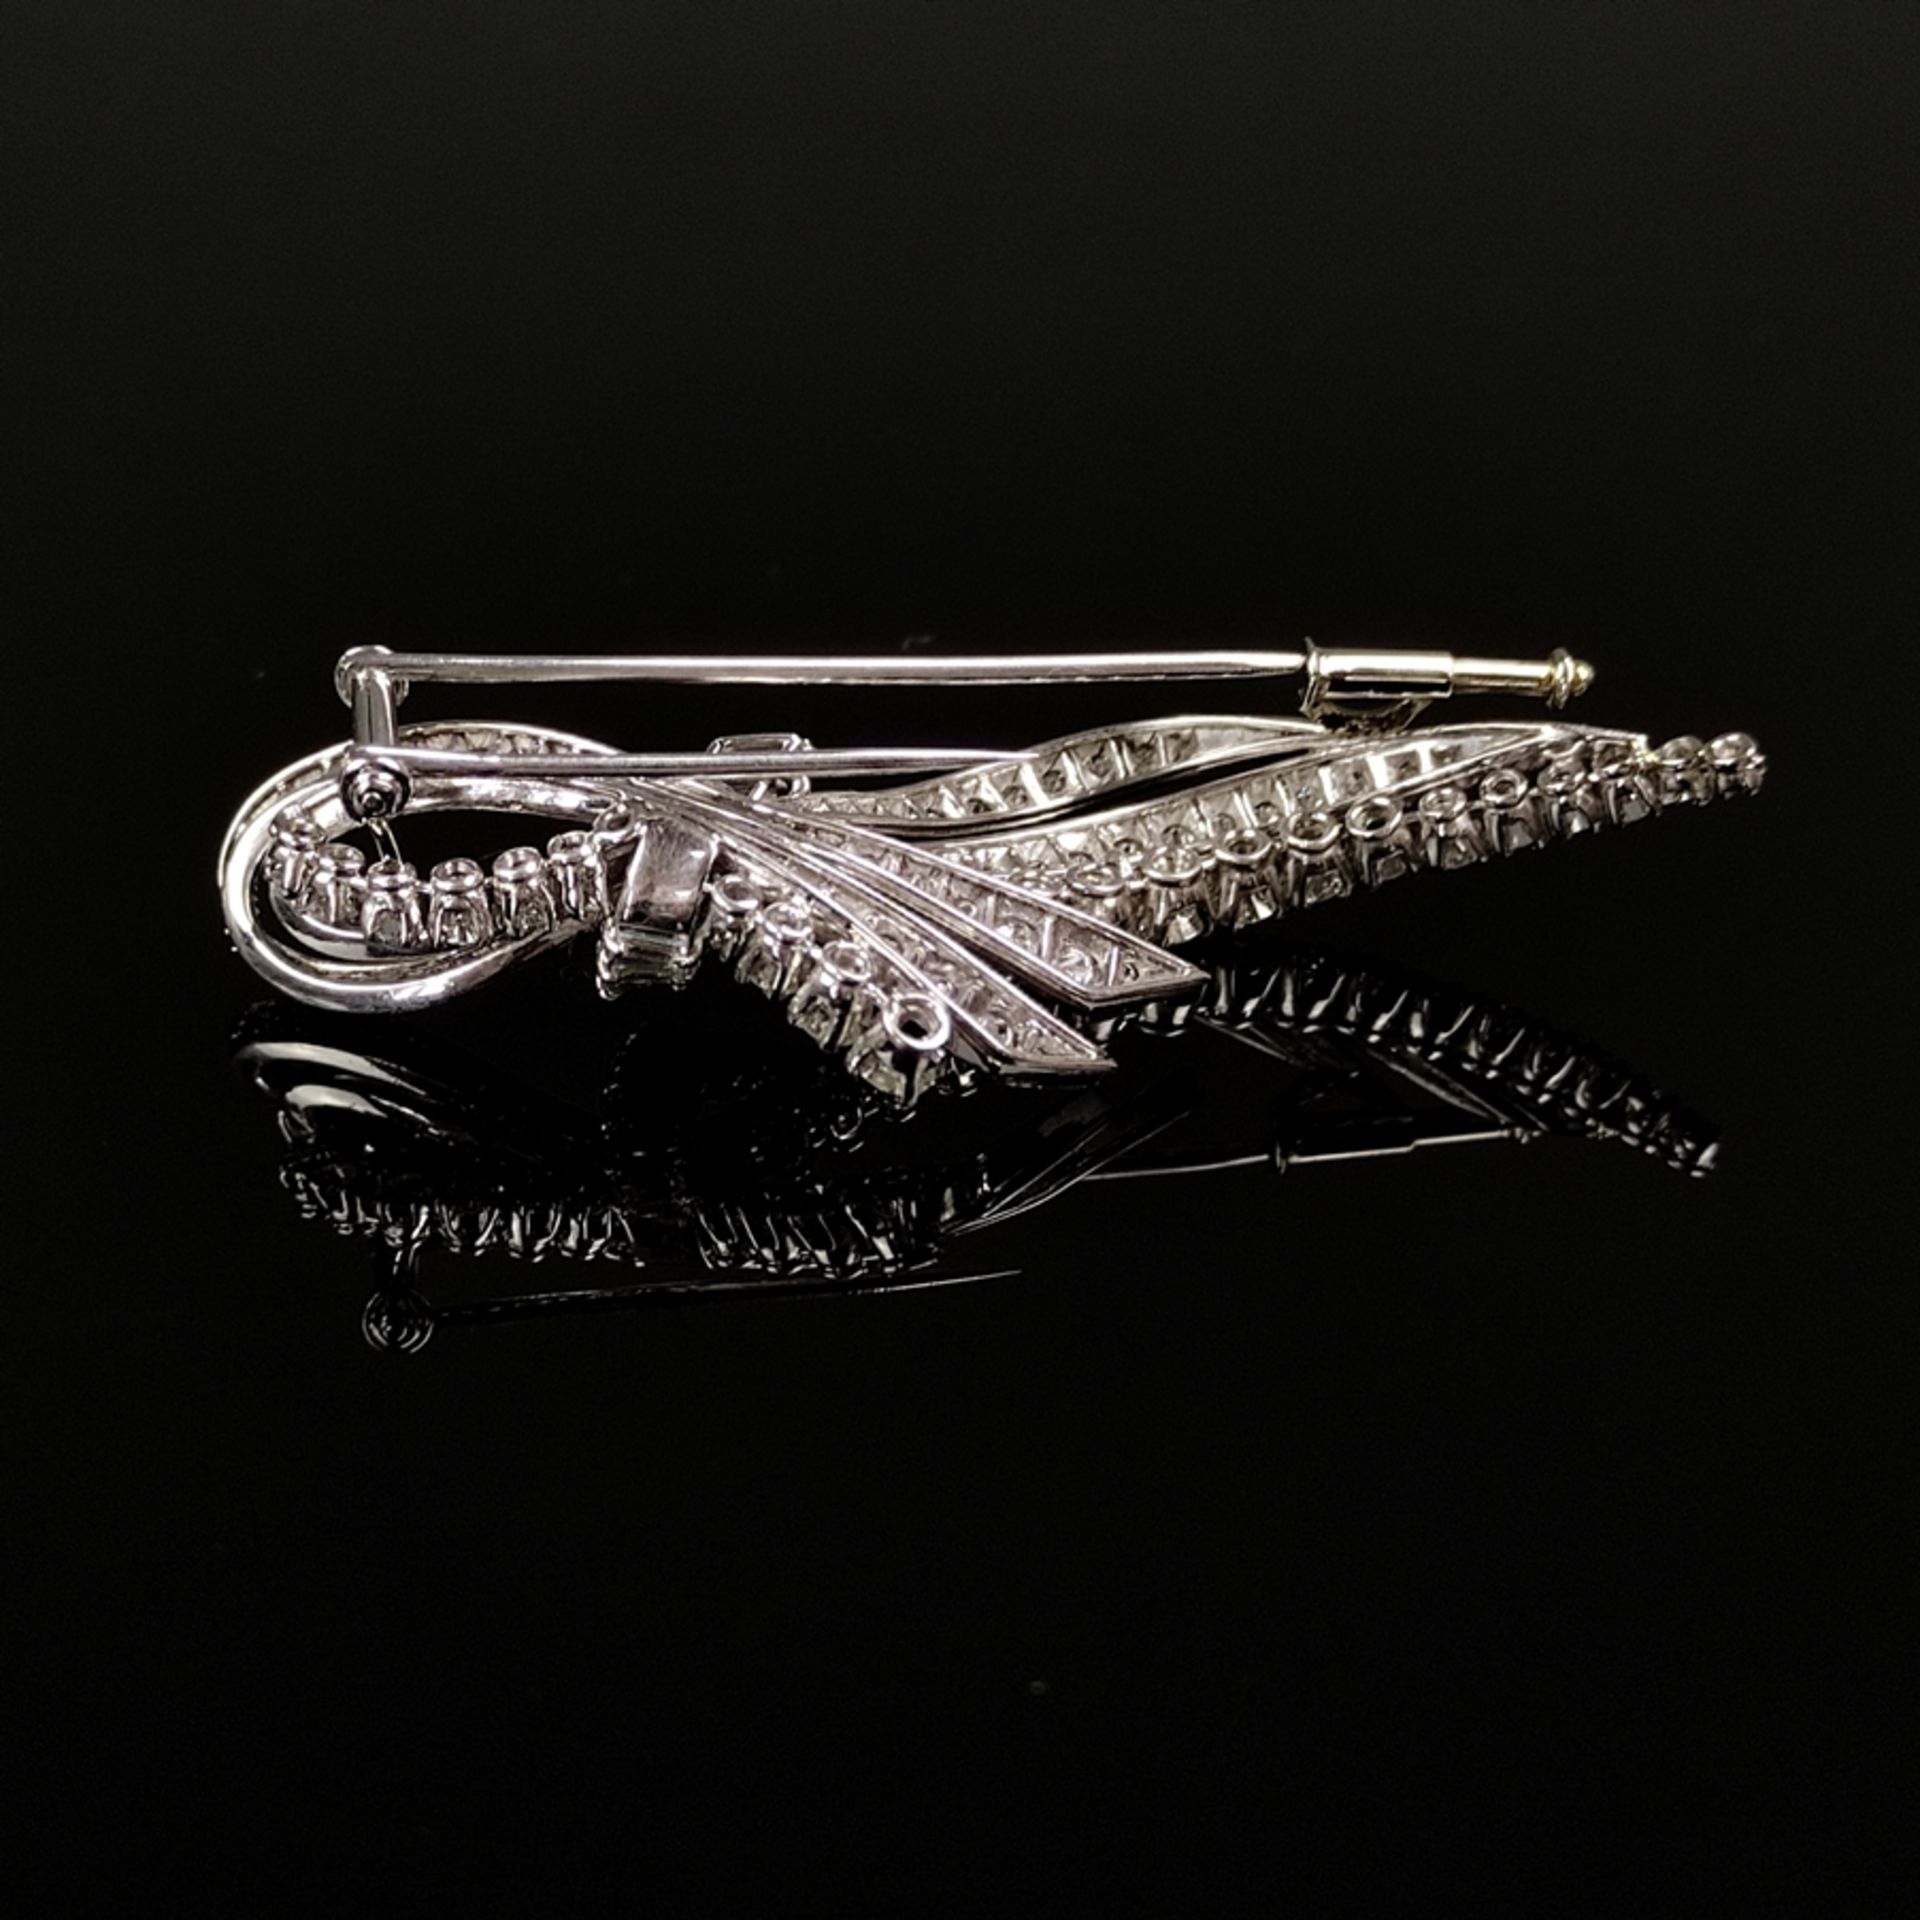 Exclusive diamond brooch, 750/18K white gold (hallmarked), 13.6g, modern ribbon shape, set with a t - Image 2 of 3